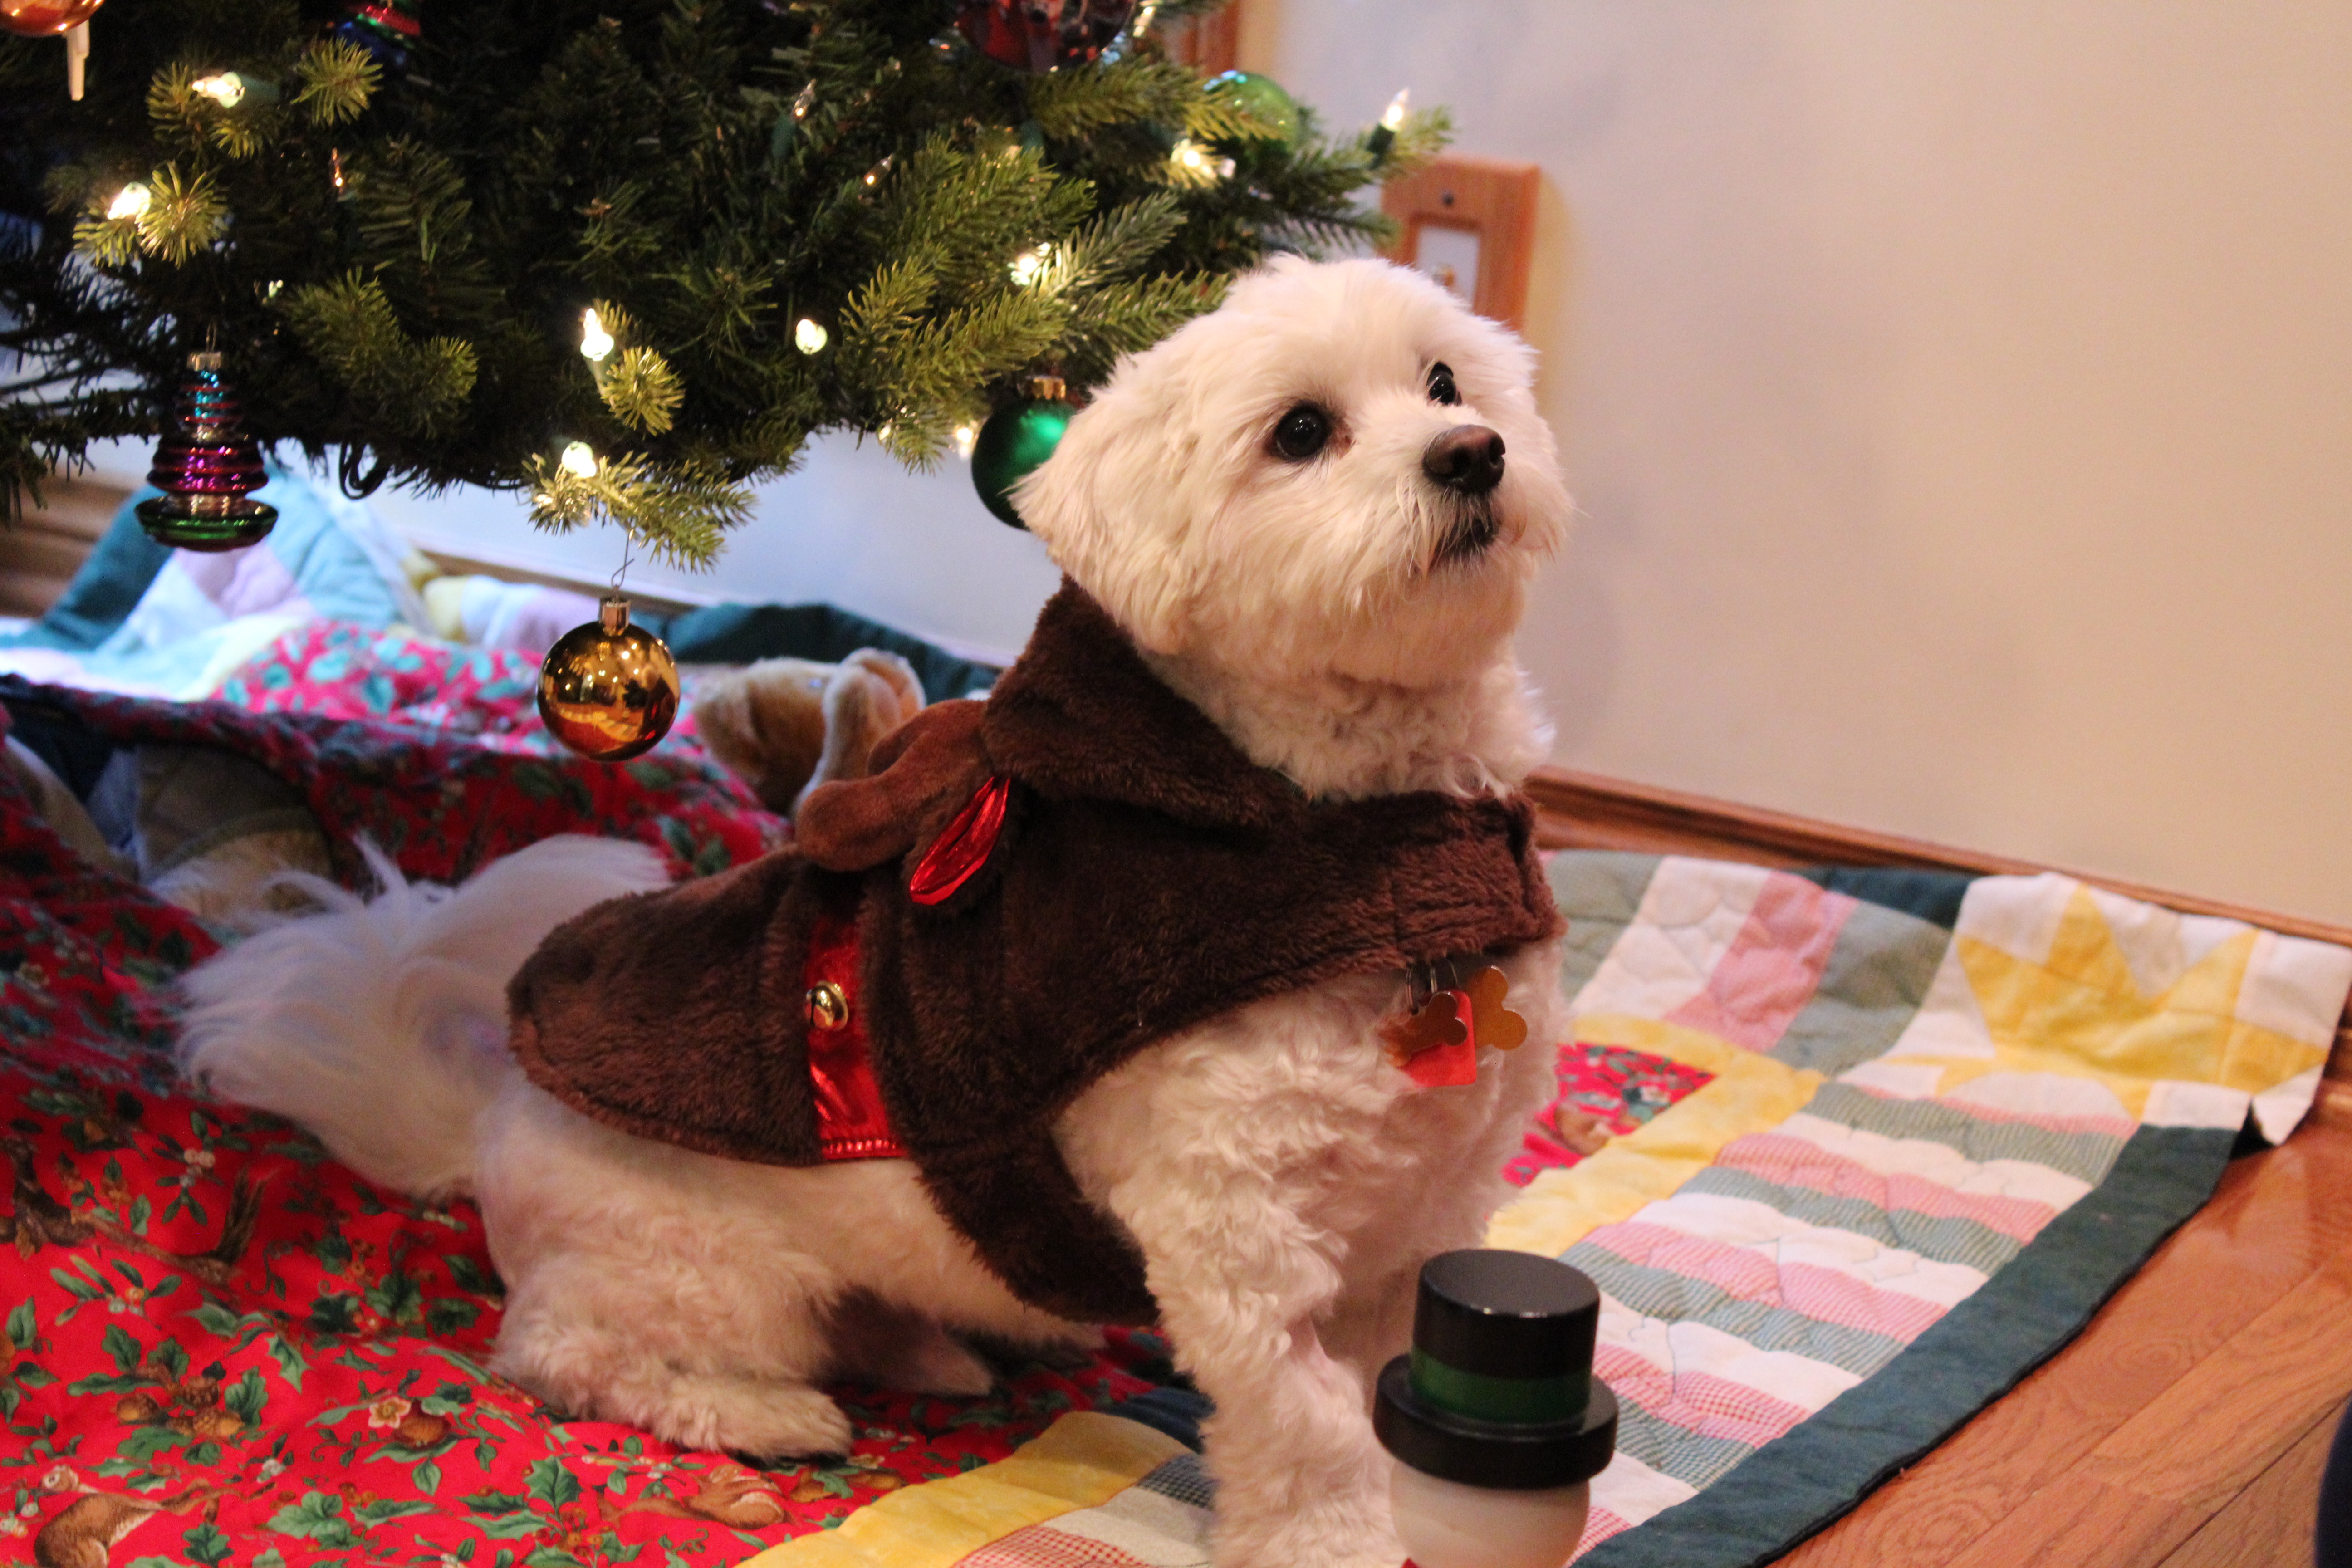 Dressing up pets for the holidays